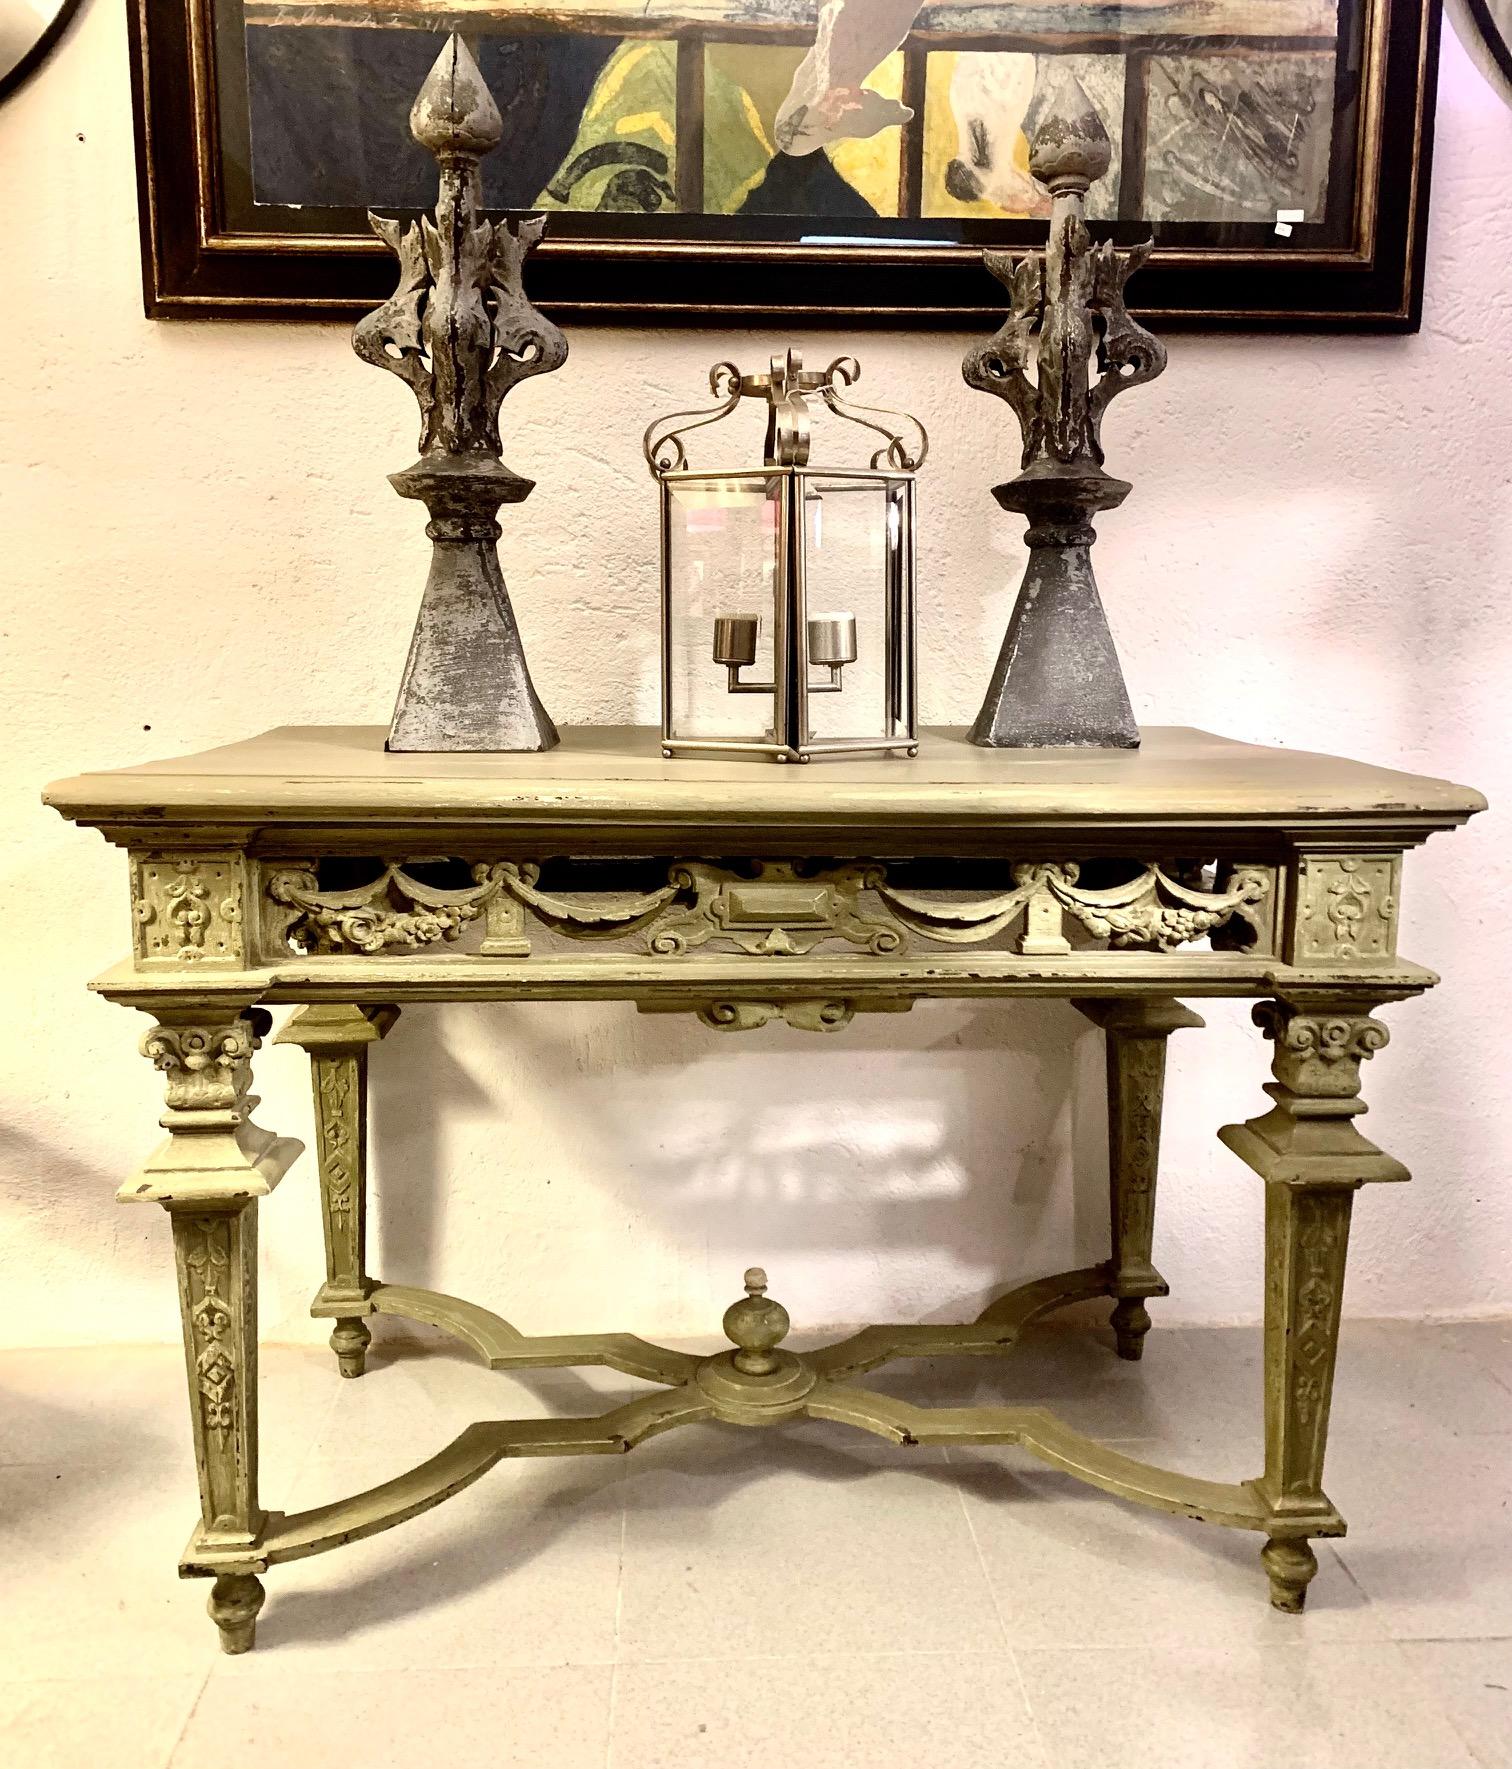 Very elegant French console table, entirely hand painted. The upper part is trapezoidal in shape, with cantilevered corners. The square and conical legs of the baluster are joined by an X-shaped frame, topped with a large central finial. Raised on